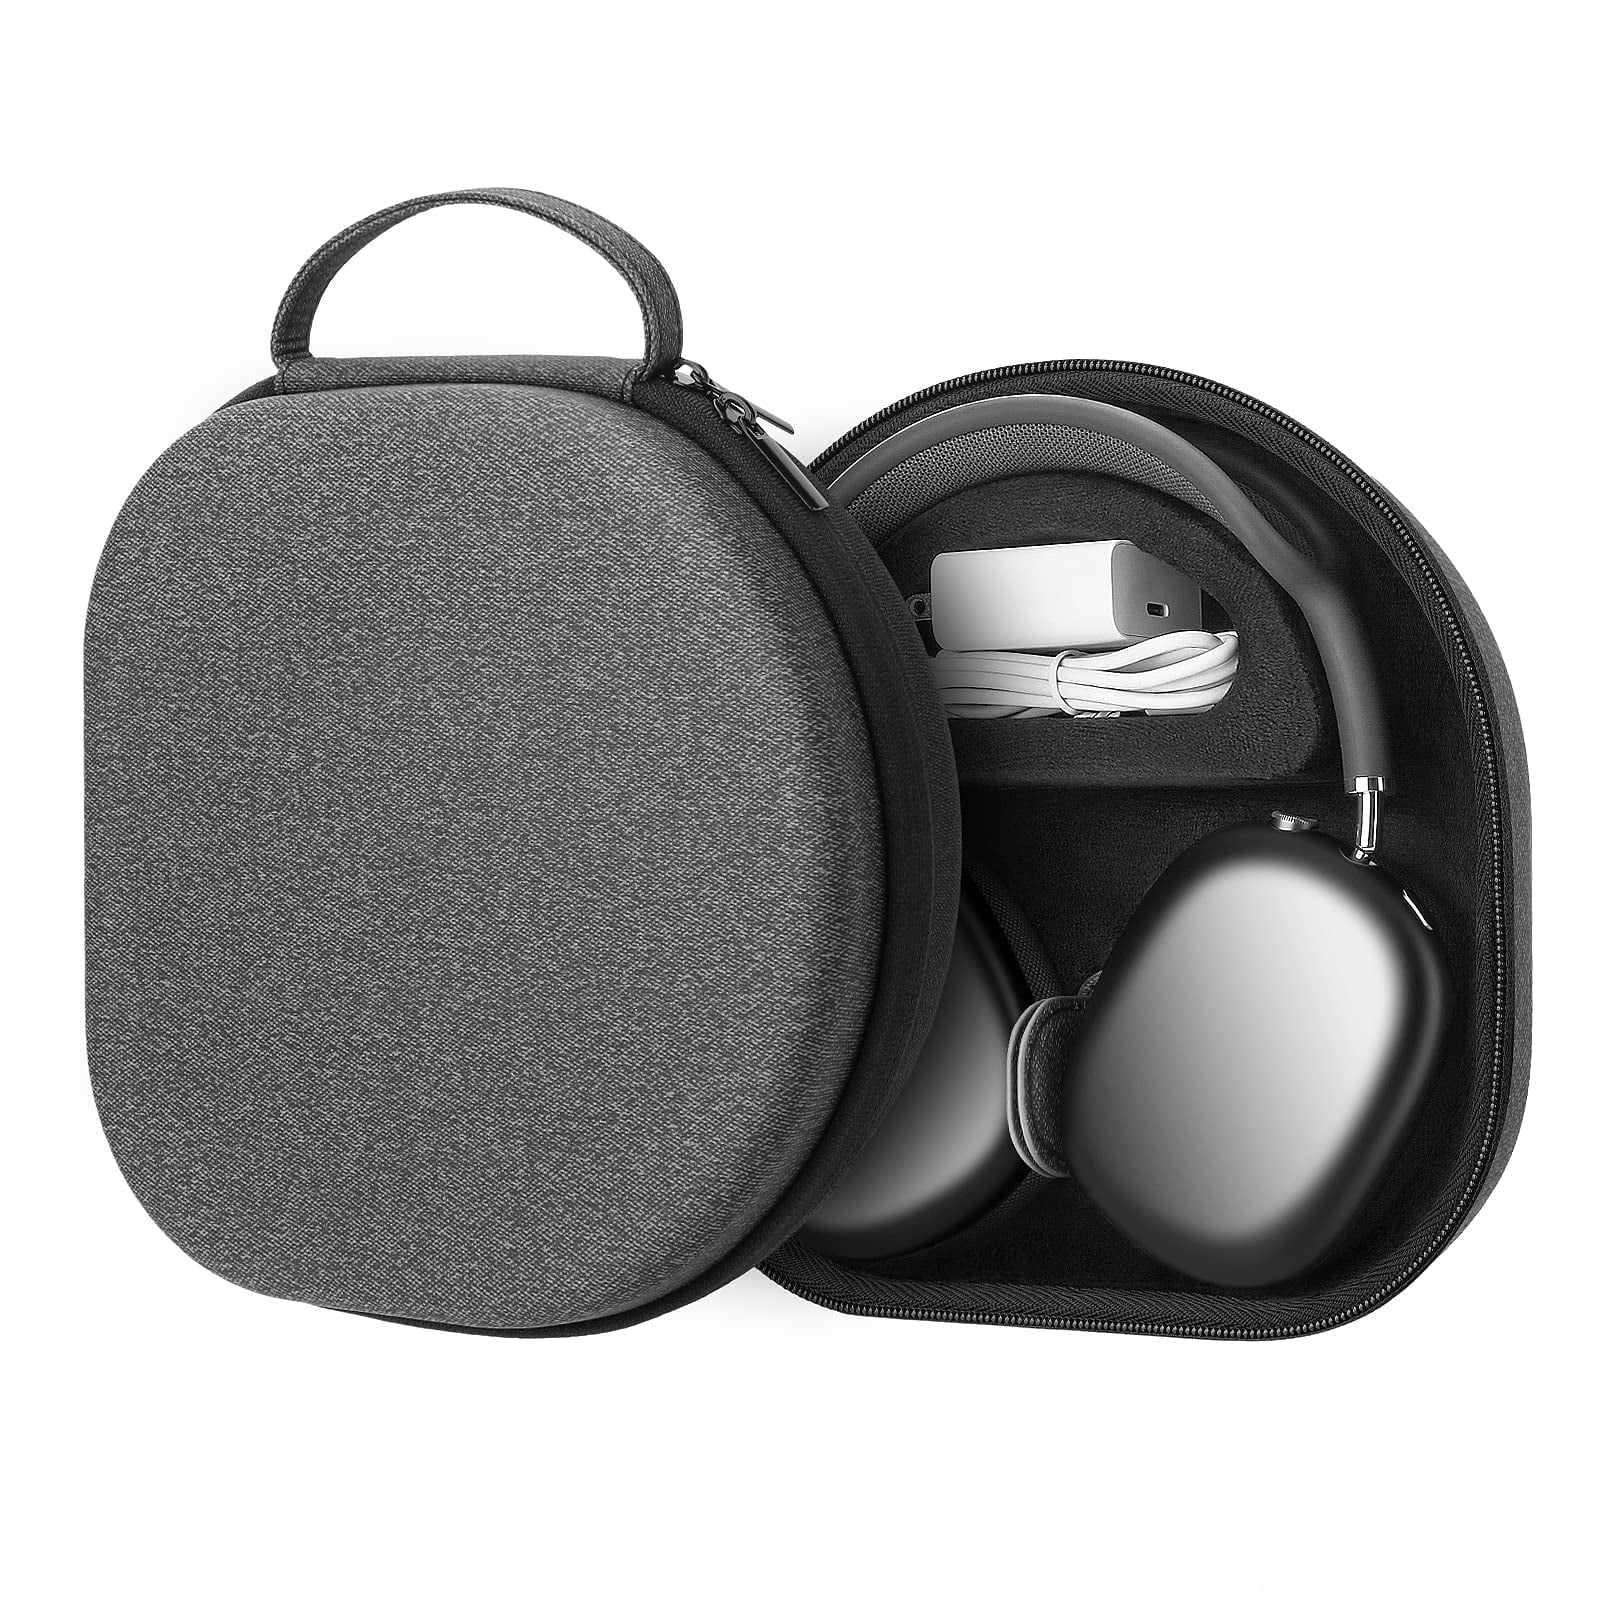 YINKE Smart Case for Apple AirPods Max Case with Sleep Convenient Carrying Travel Hard Storage Cover Bag (Gray)